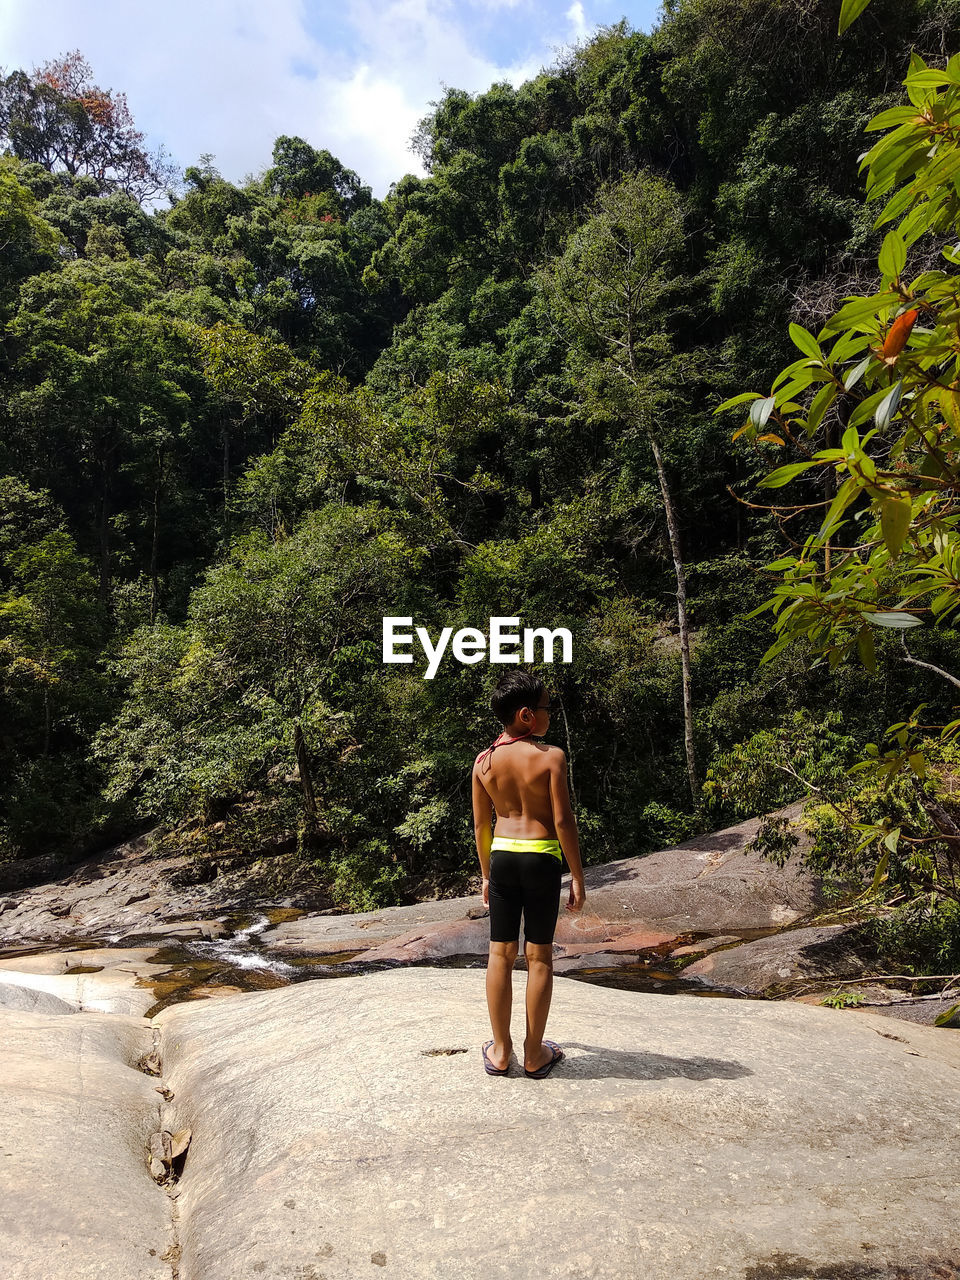 Rear view of shirtless boy standing on rock against trees in forest